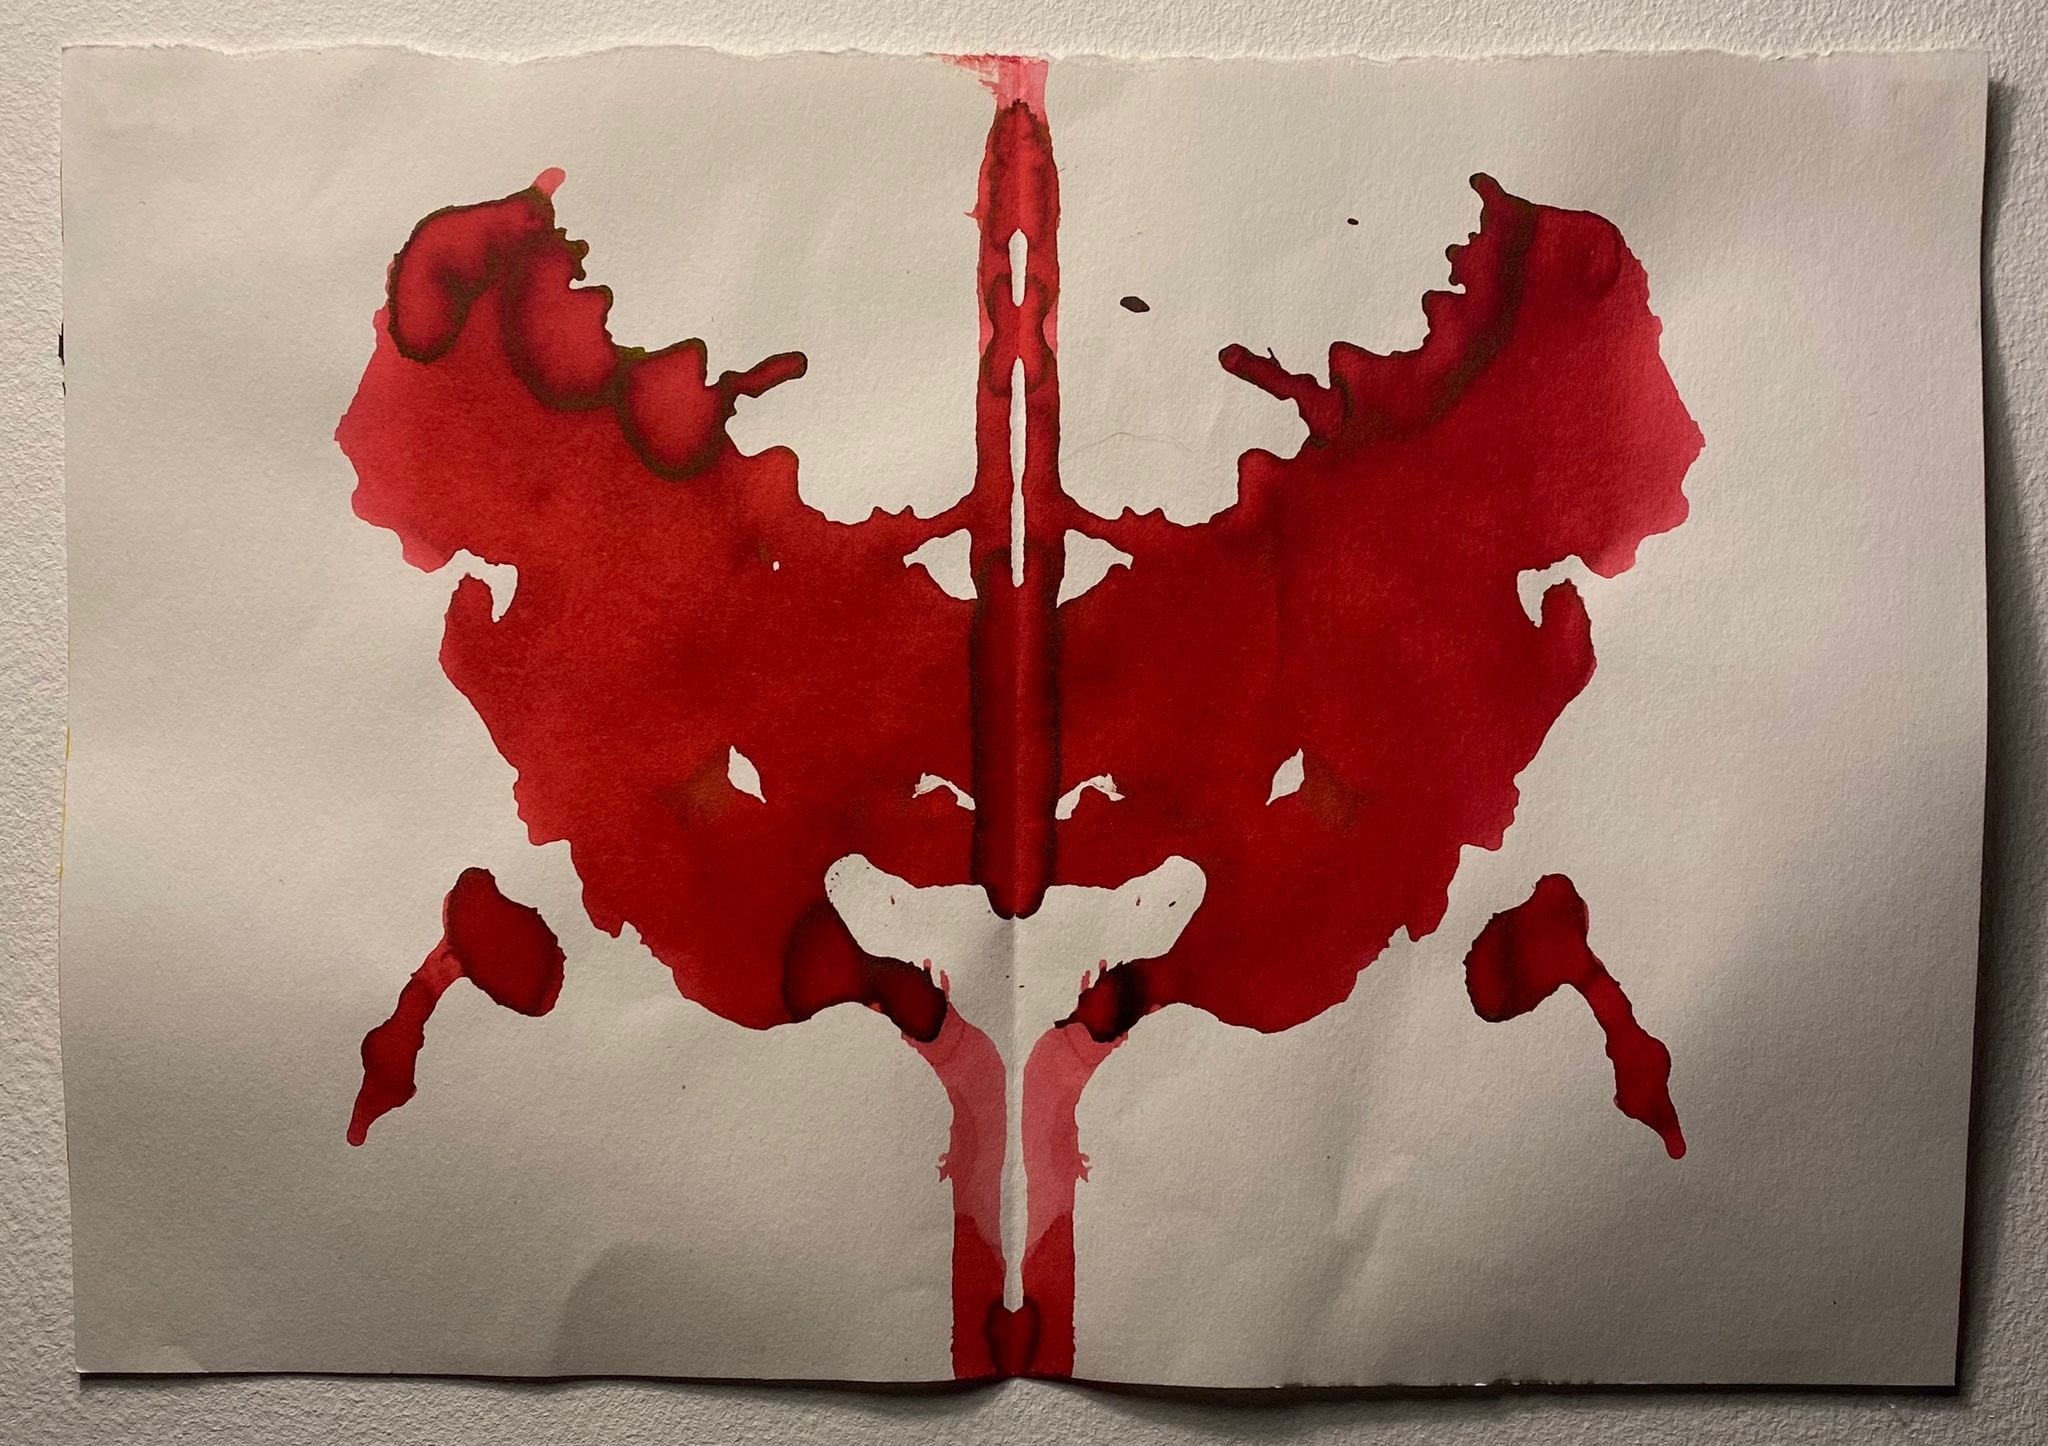 A piece of paper showing a Rorschach style ink blot, also printed in red. The print resembles a dripping pelvis. A bleeding, subconscious, skeletal image.